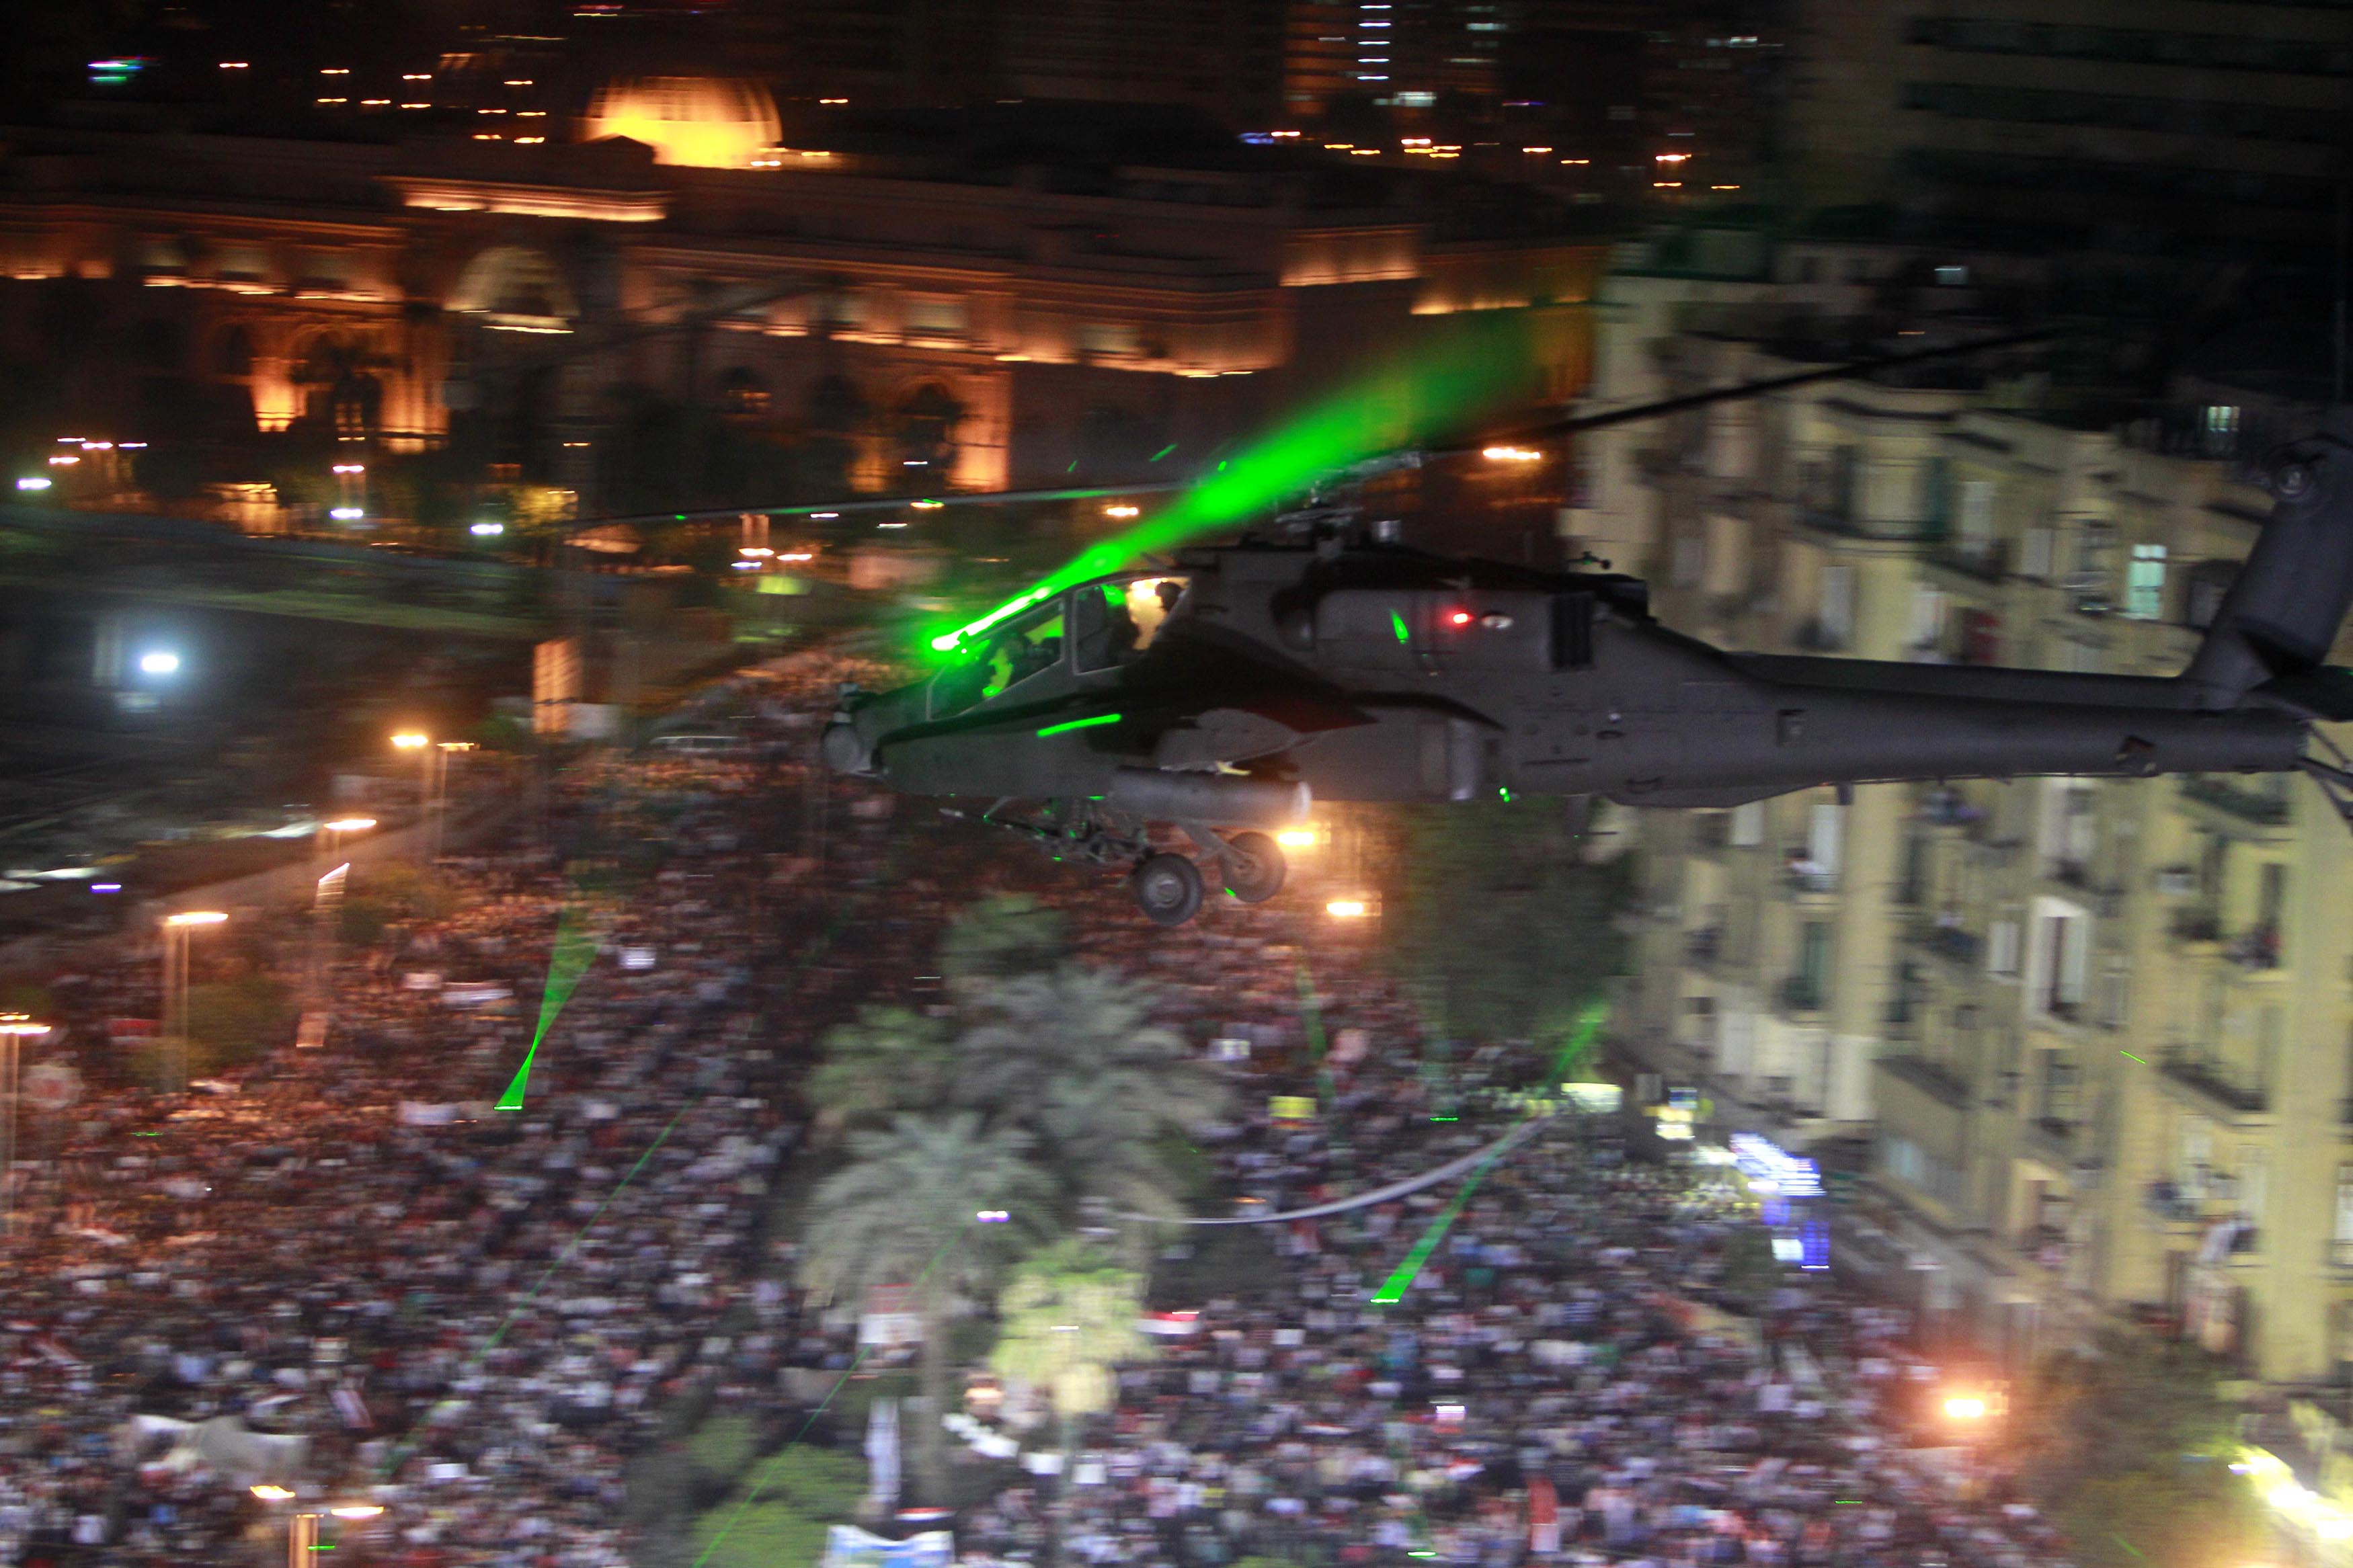 An AH-64 Apache helicopter flies over Cairo's Tahrir Square in 2013. (REUTERS / Mohamed Abd El Ghany)